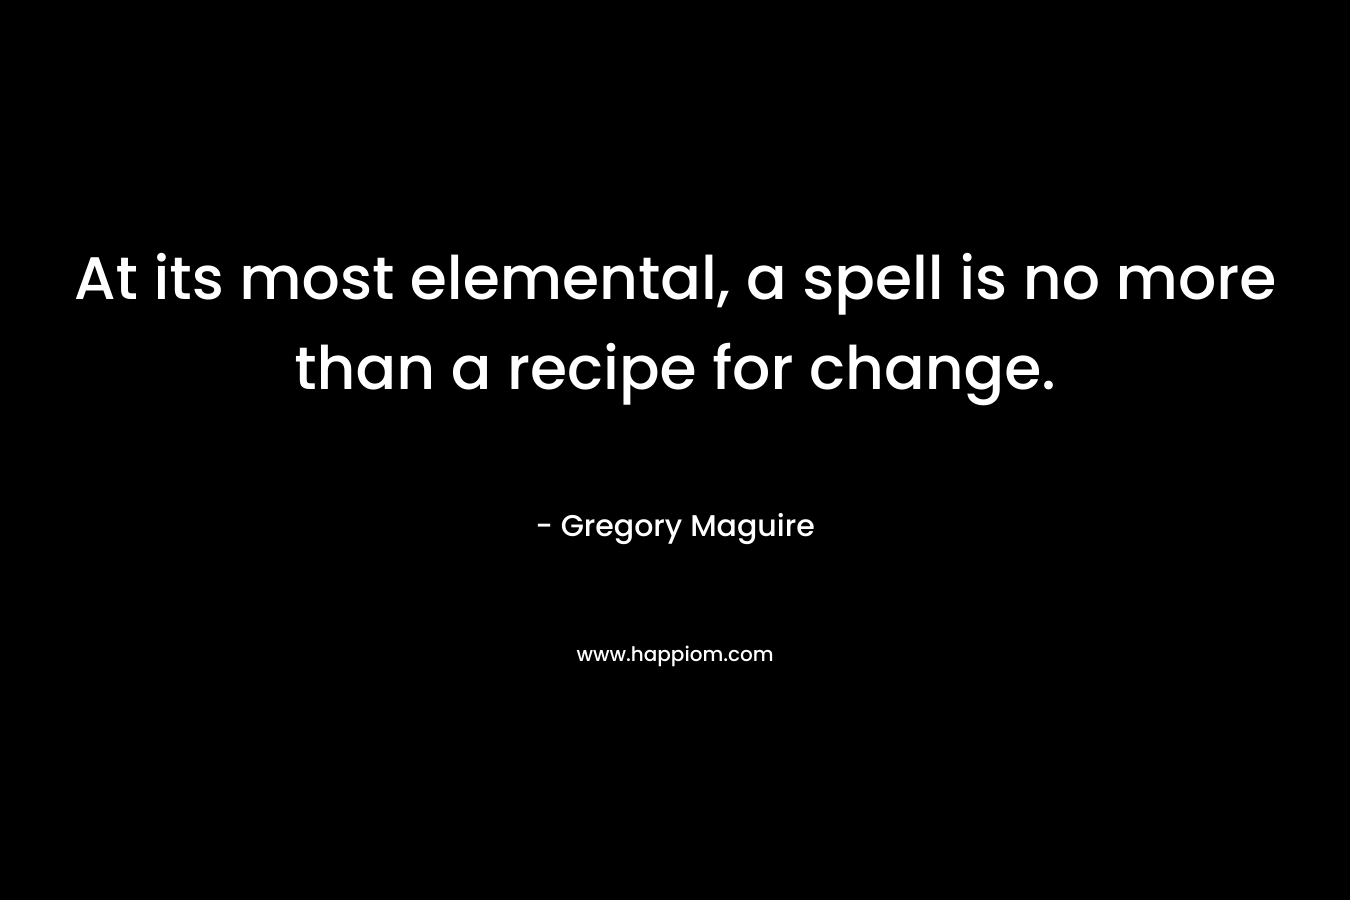 At its most elemental, a spell is no more than a recipe for change. – Gregory Maguire